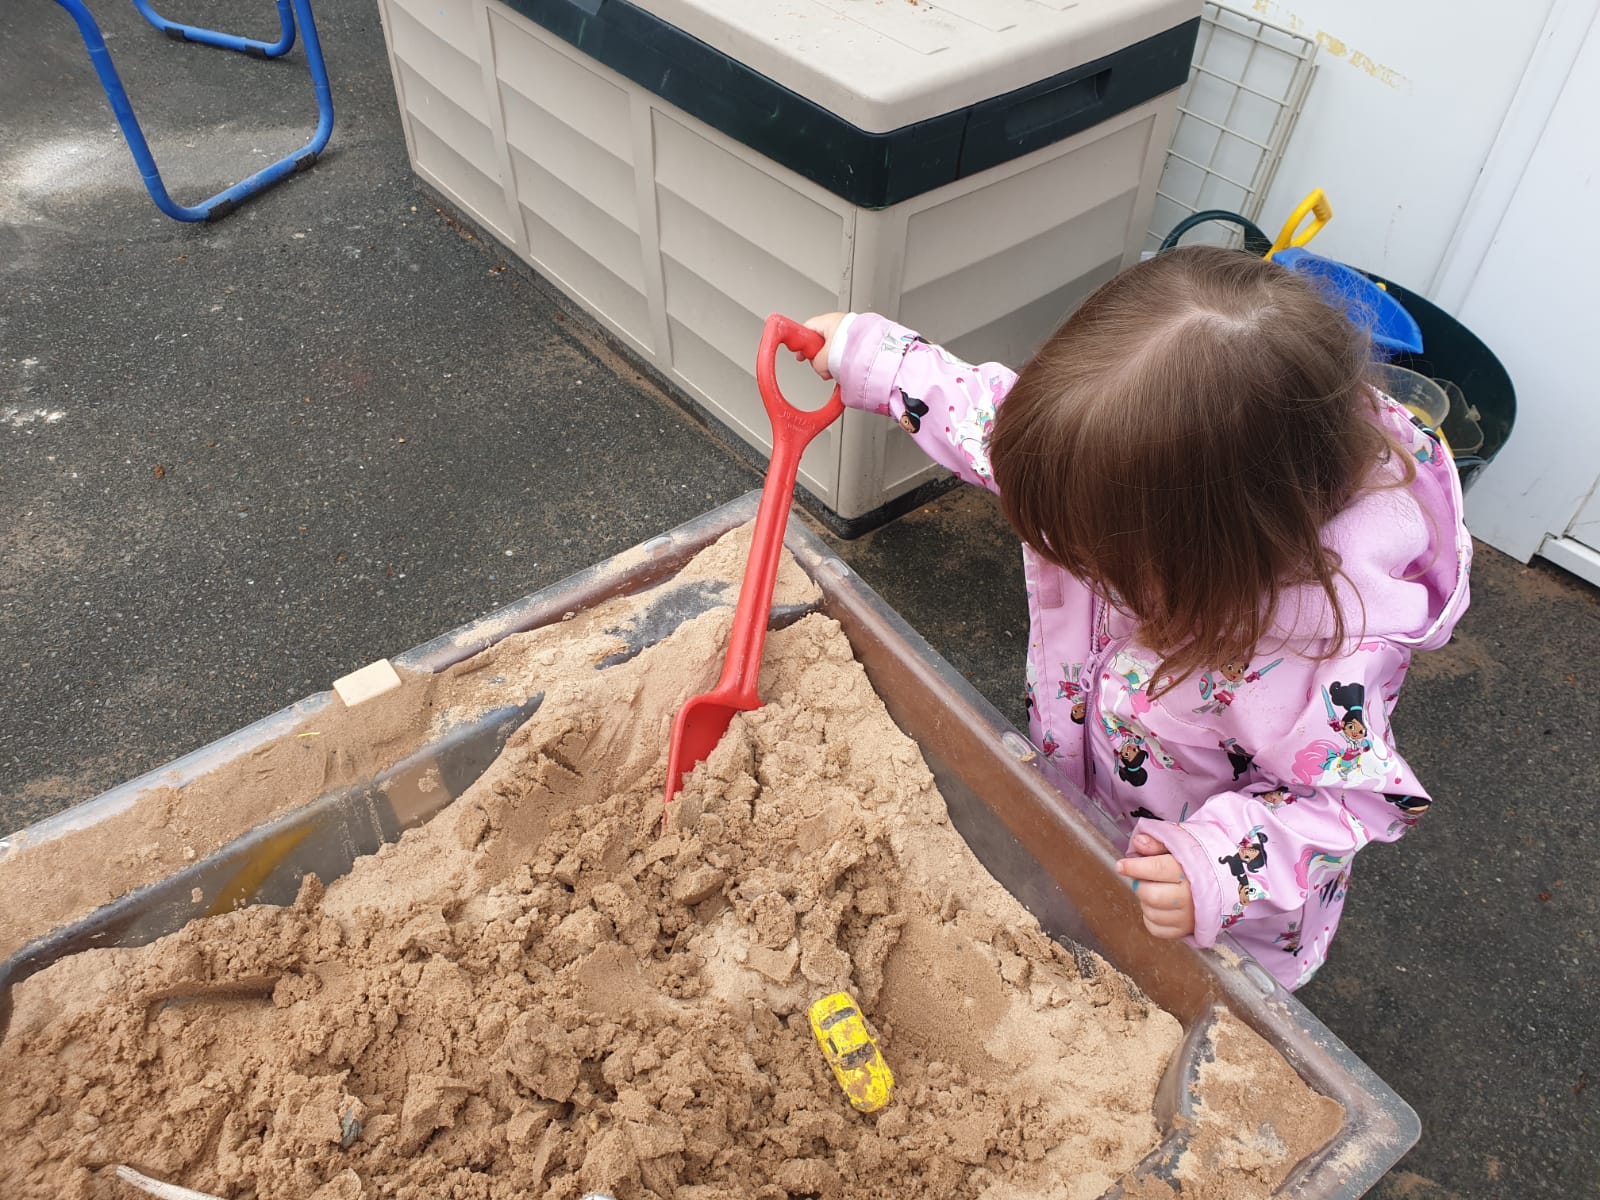 Child playing in sand